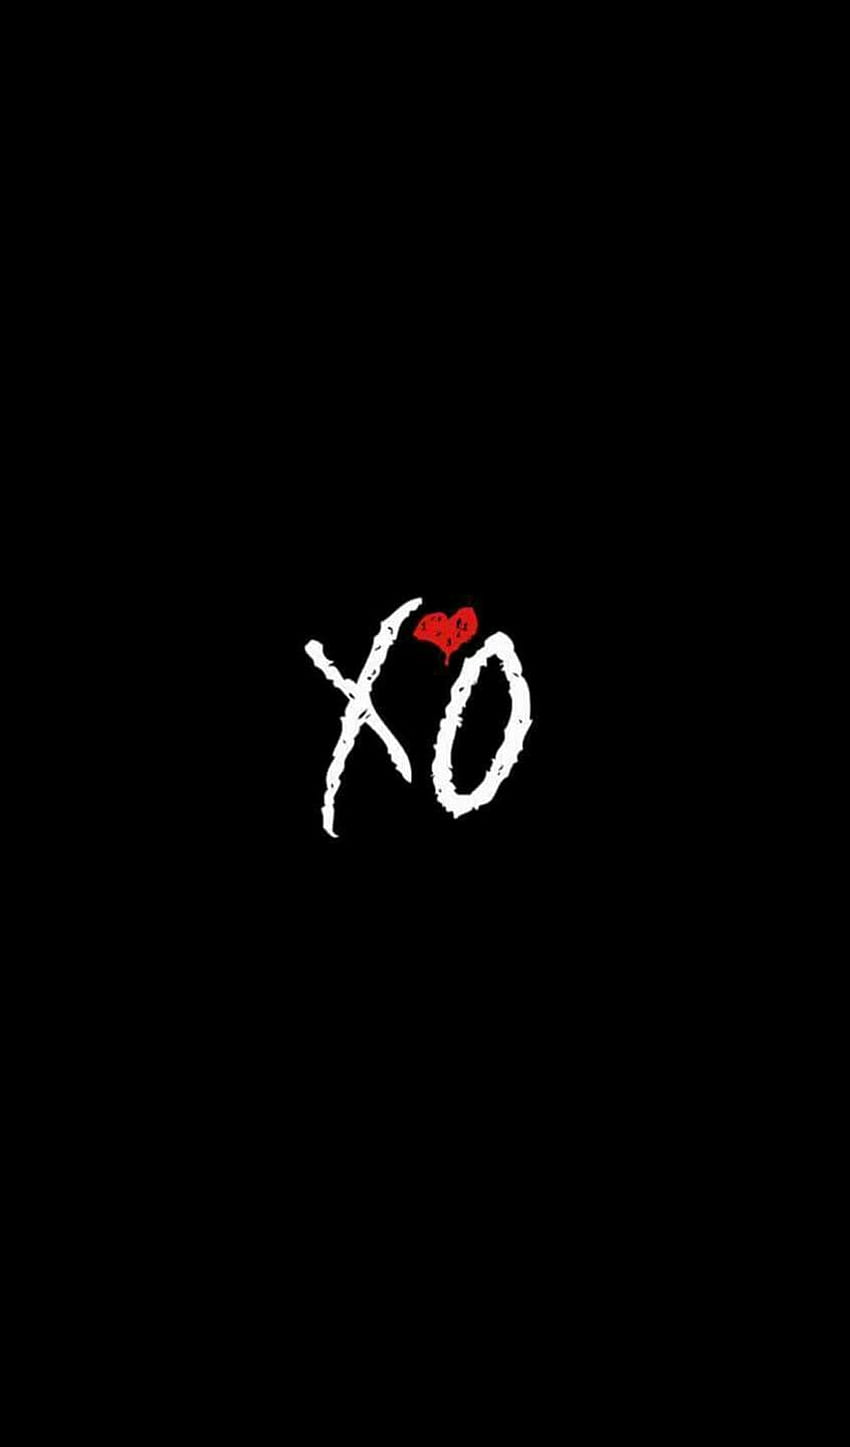 Kevin on Xo. The weeknd iphone, iPhone, Simple Fall HD phone wallpaper